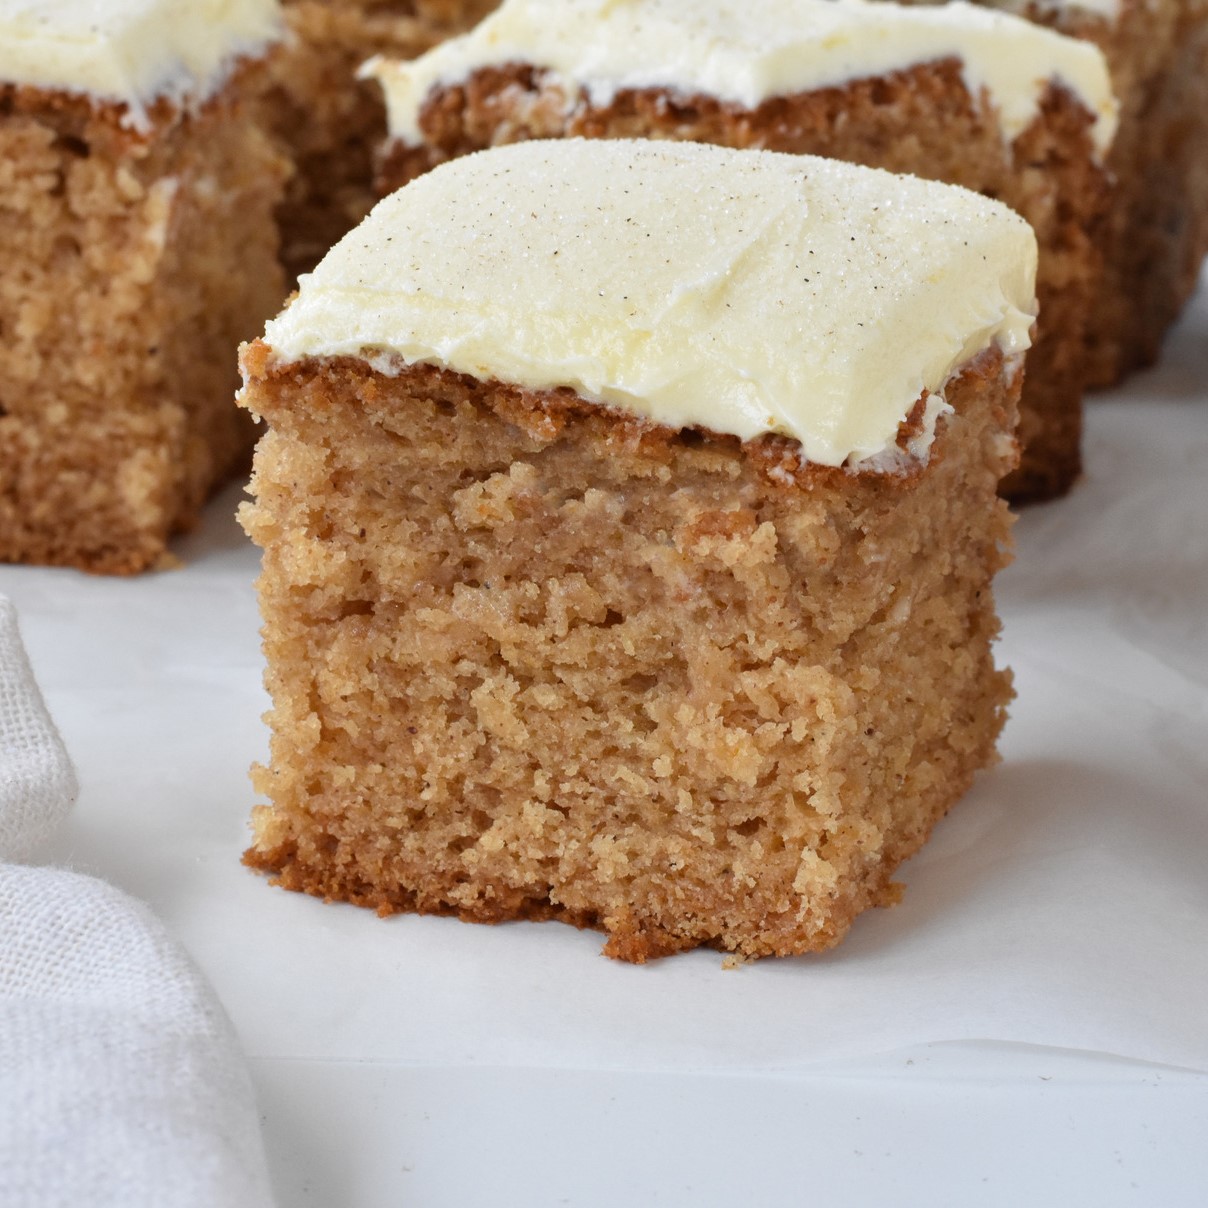 Square of spice cake with frosting on baking paper.